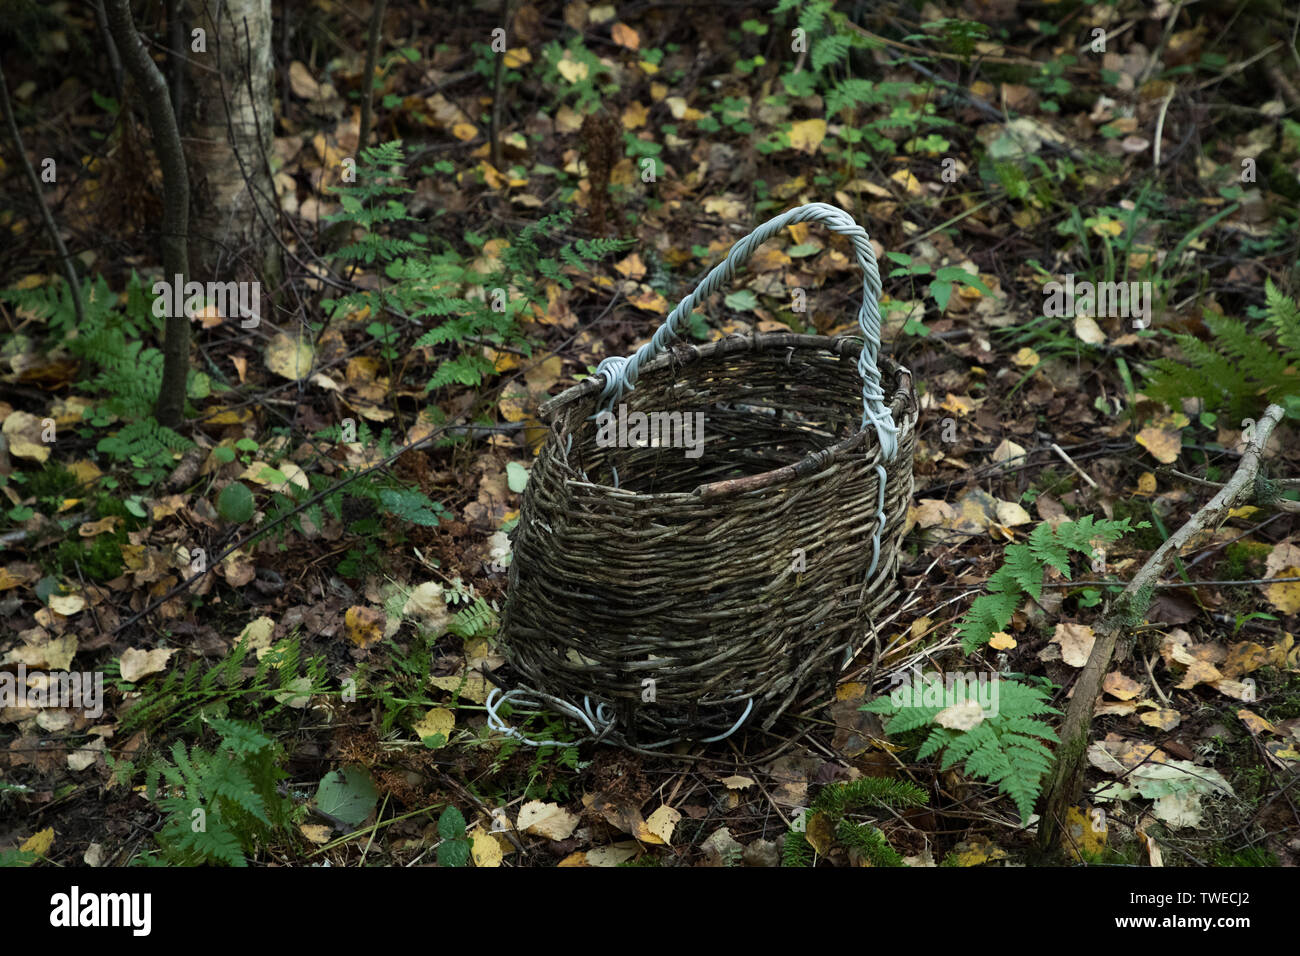 wooden basket in the forest on the ground in the autumn season Stock Photo